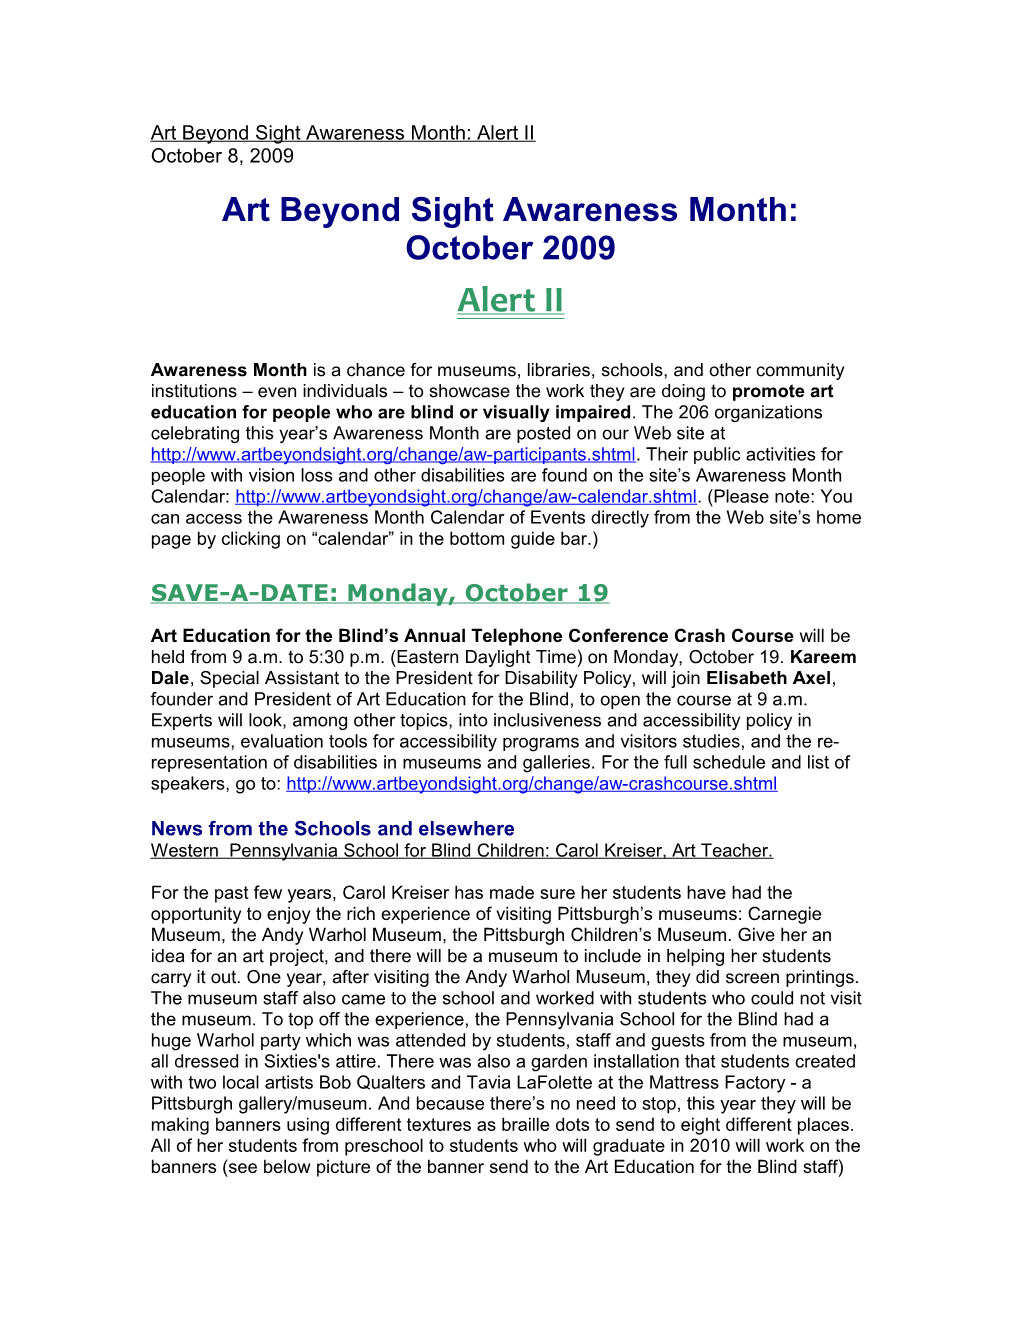 For the Past Few Years I Have Been Doing a Project in October for Art Beyond Sight